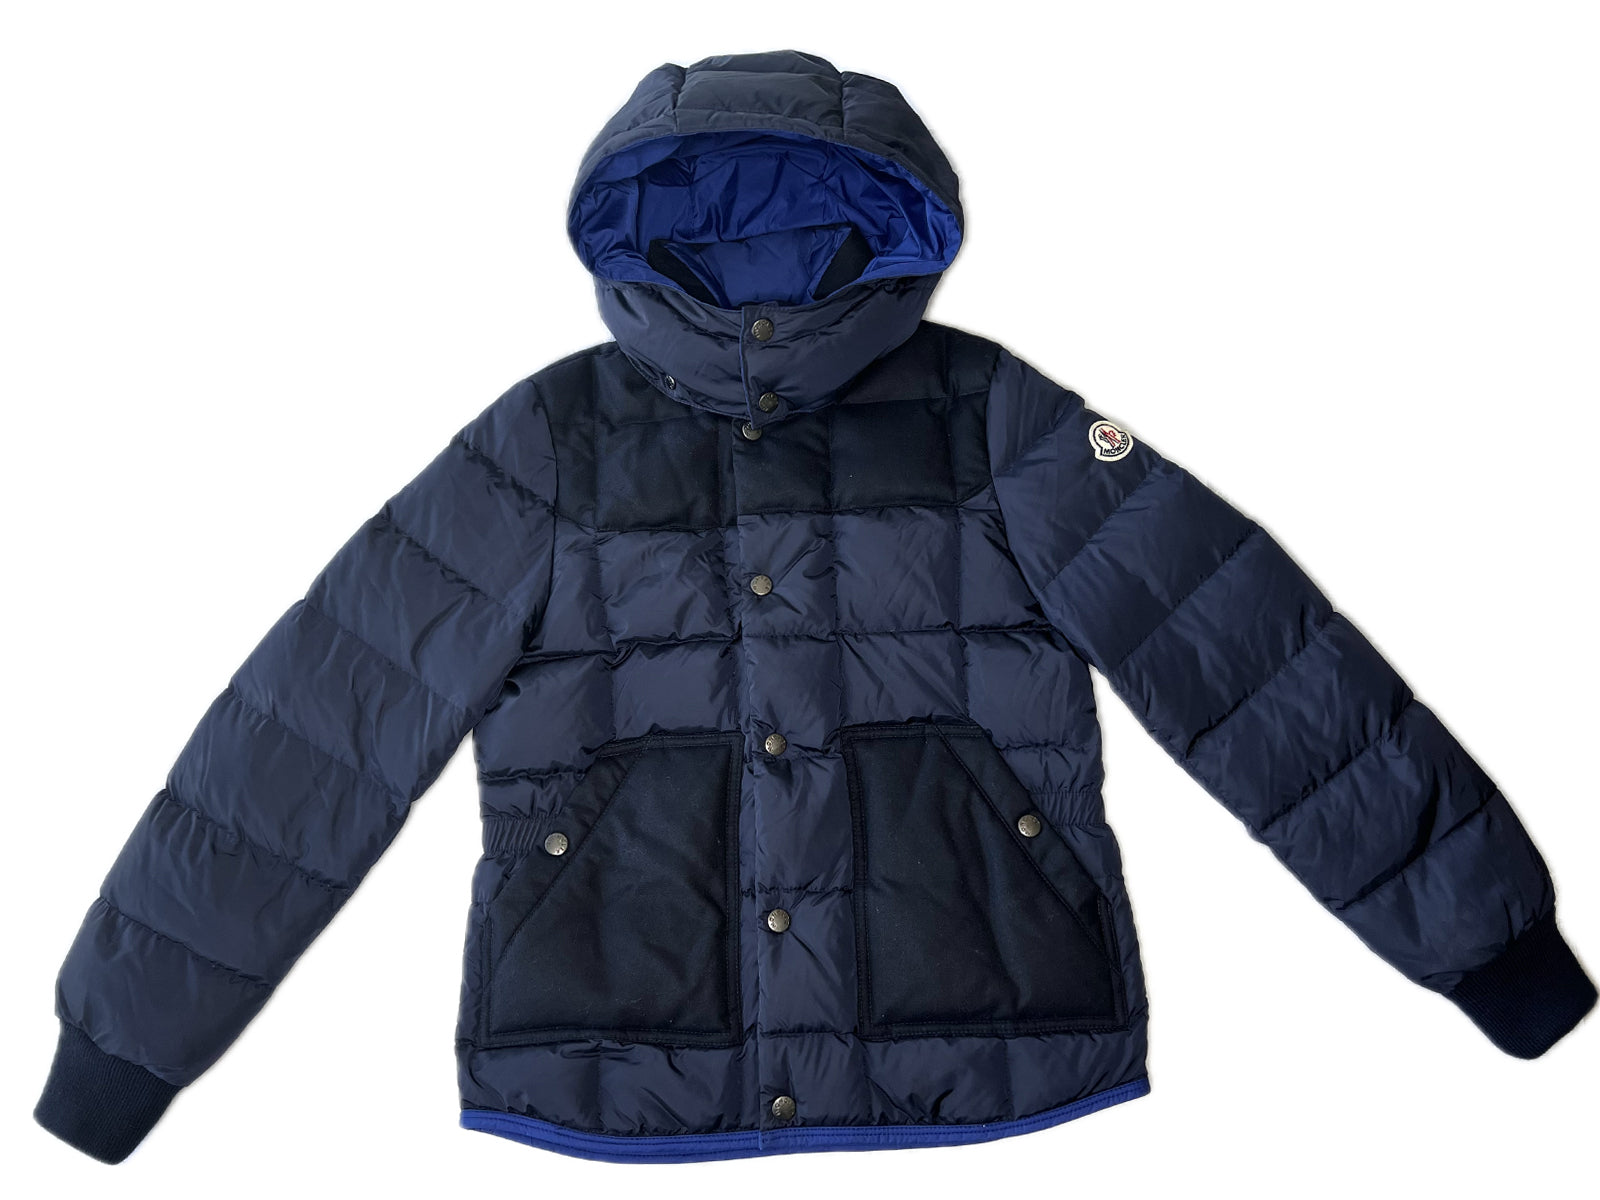 Brand New! Kids Blue Monclerr jacket with detachable hood and pockets.